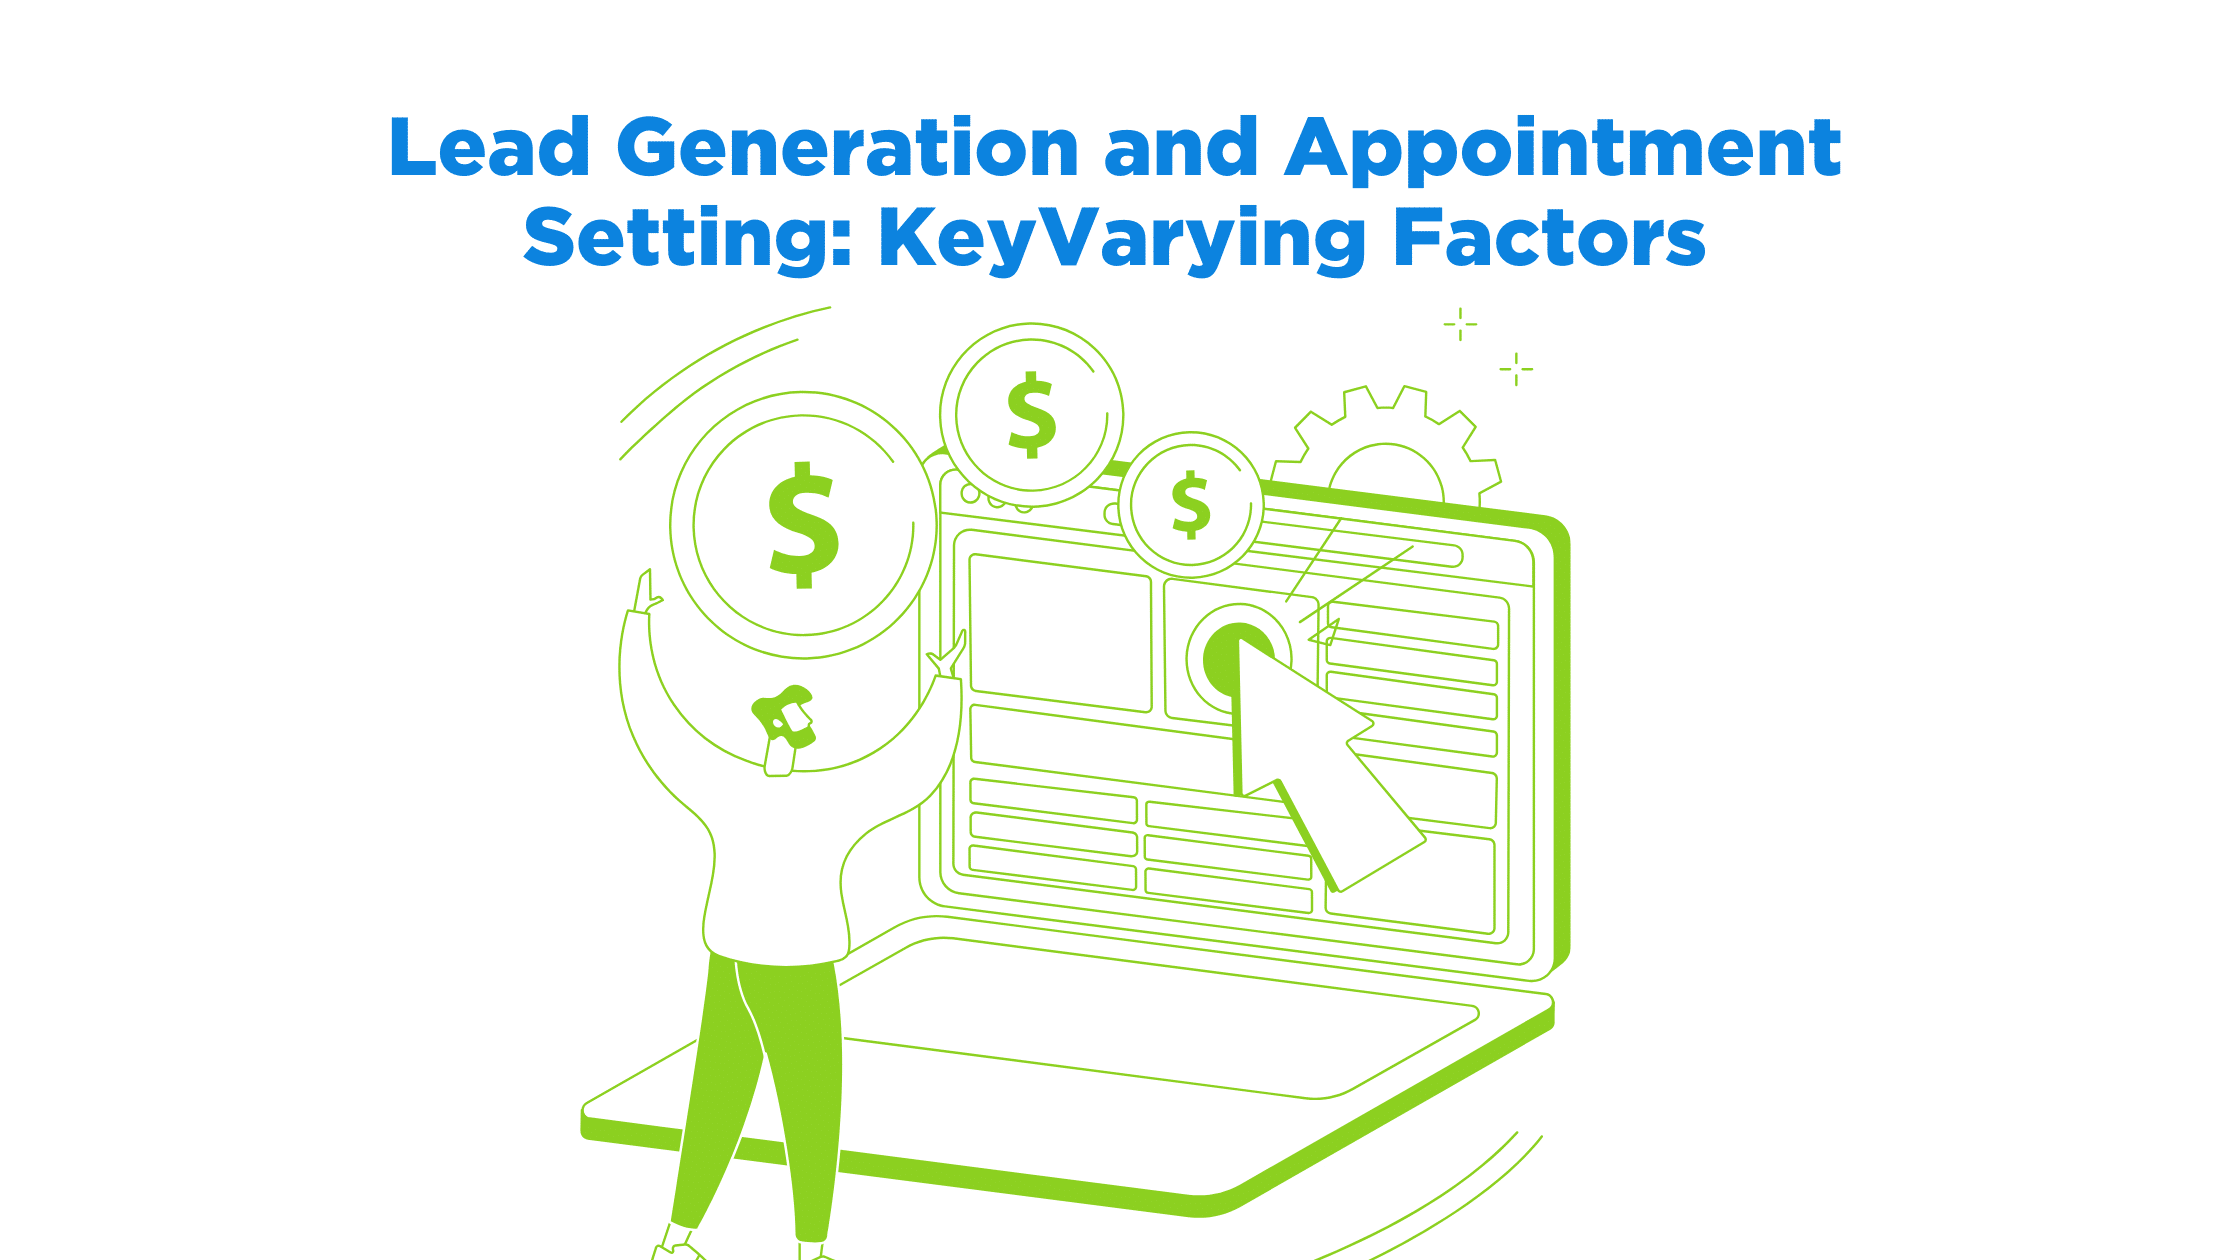 Lead Generation and Appointment Setting